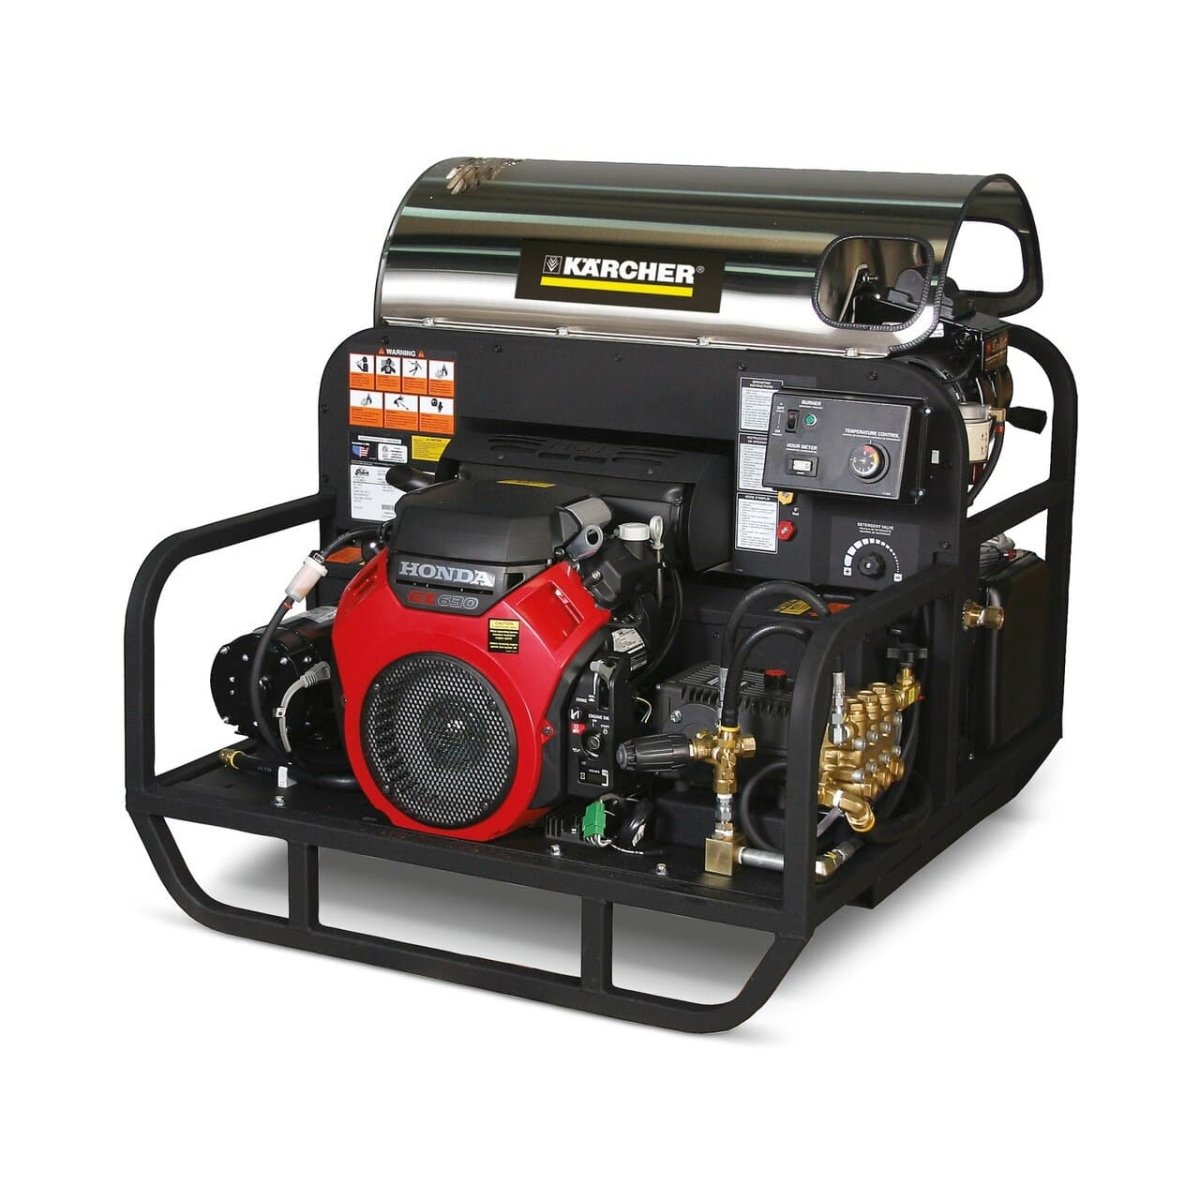 Hot Water Pressure Washer Jalapao Series - Karcher